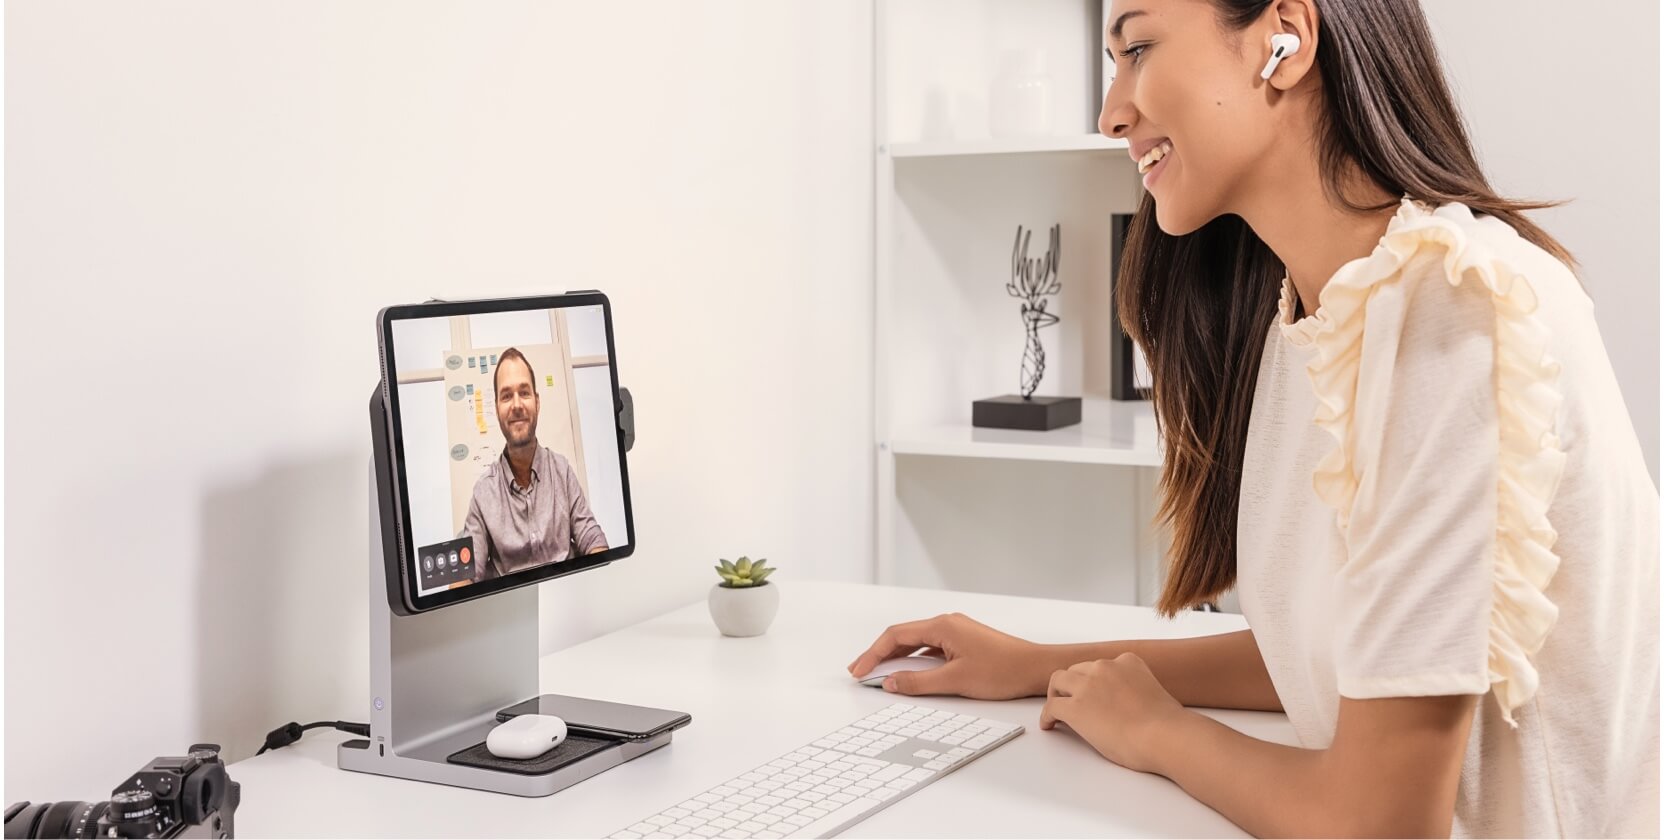 video chat on StudioDock small